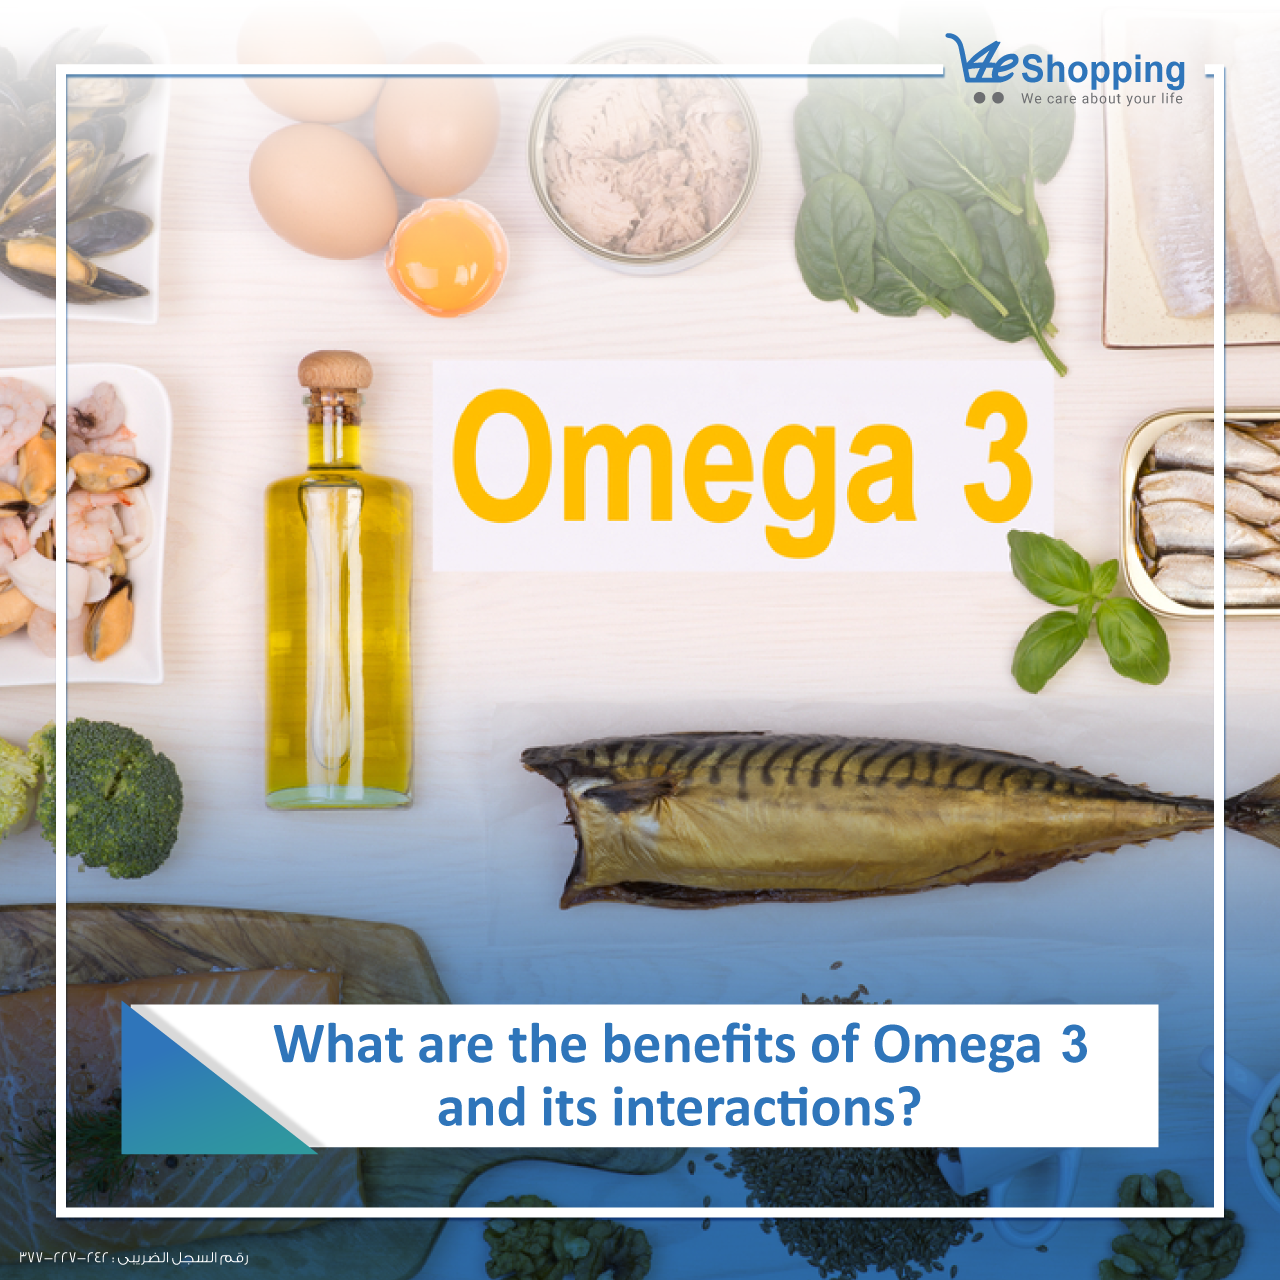 What are the benefits of Omega 3 and its interactions?